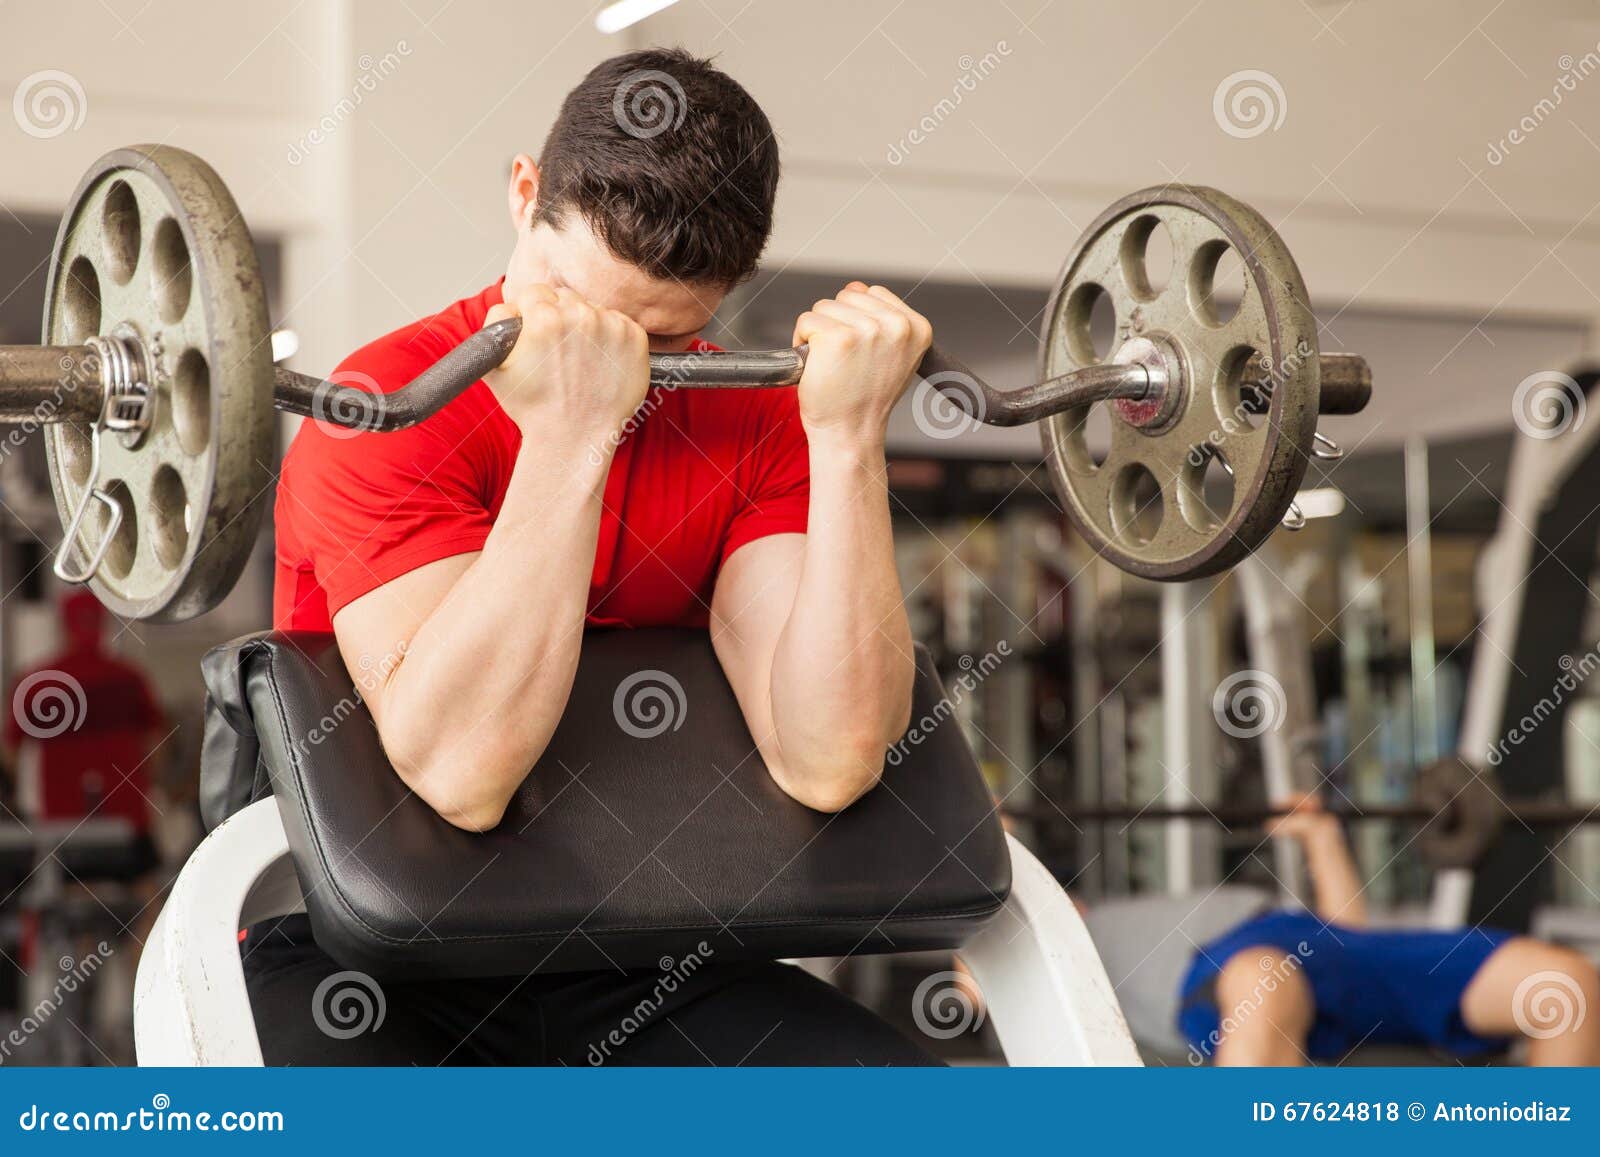 young man in a preacher bench at the gym